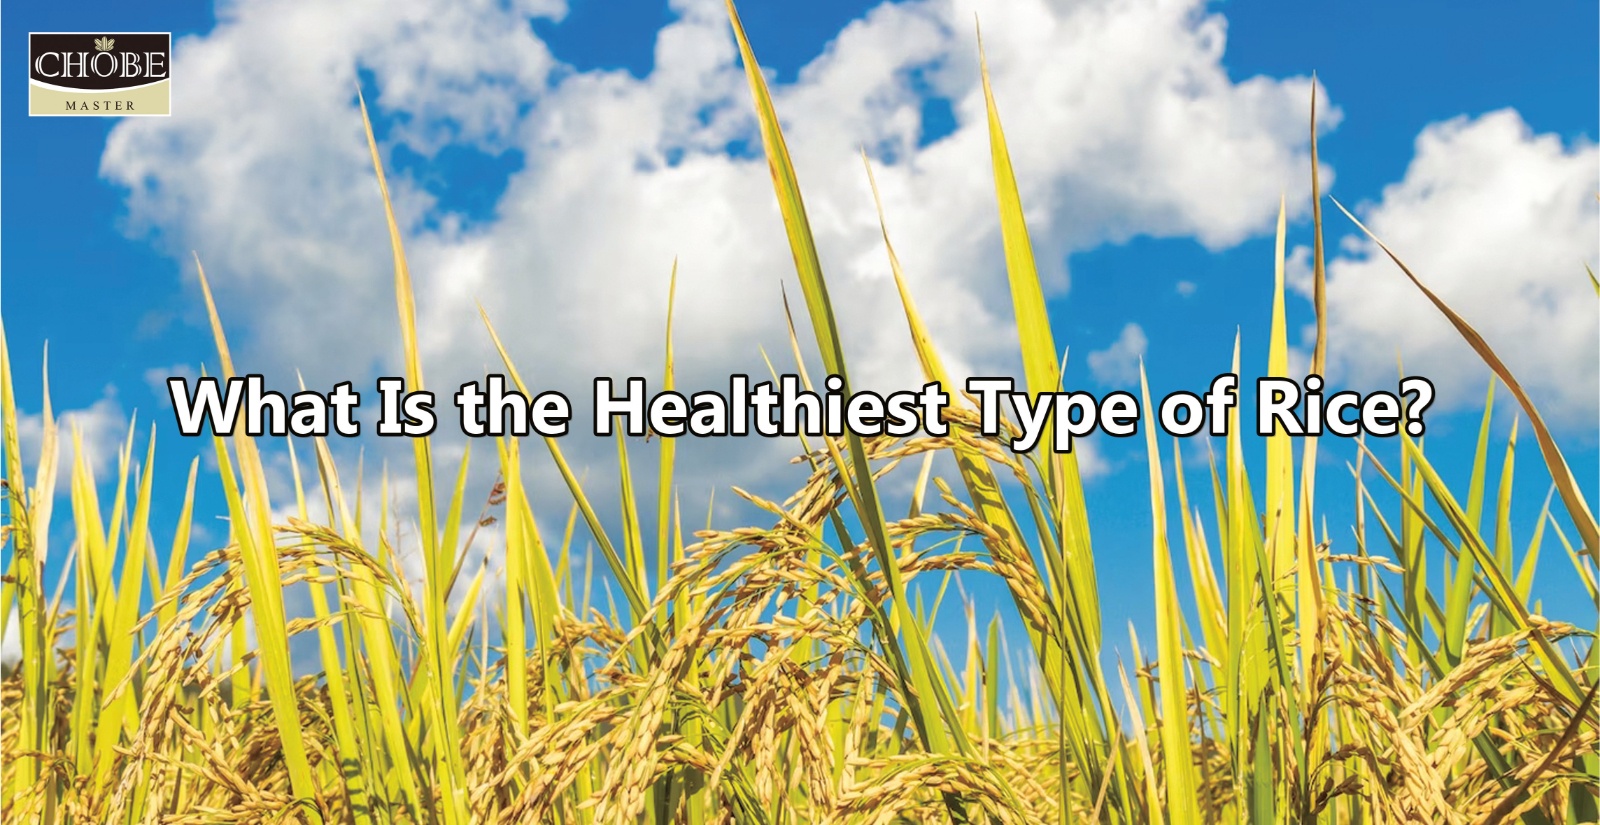 What Is the Healthiest Type of Rice?